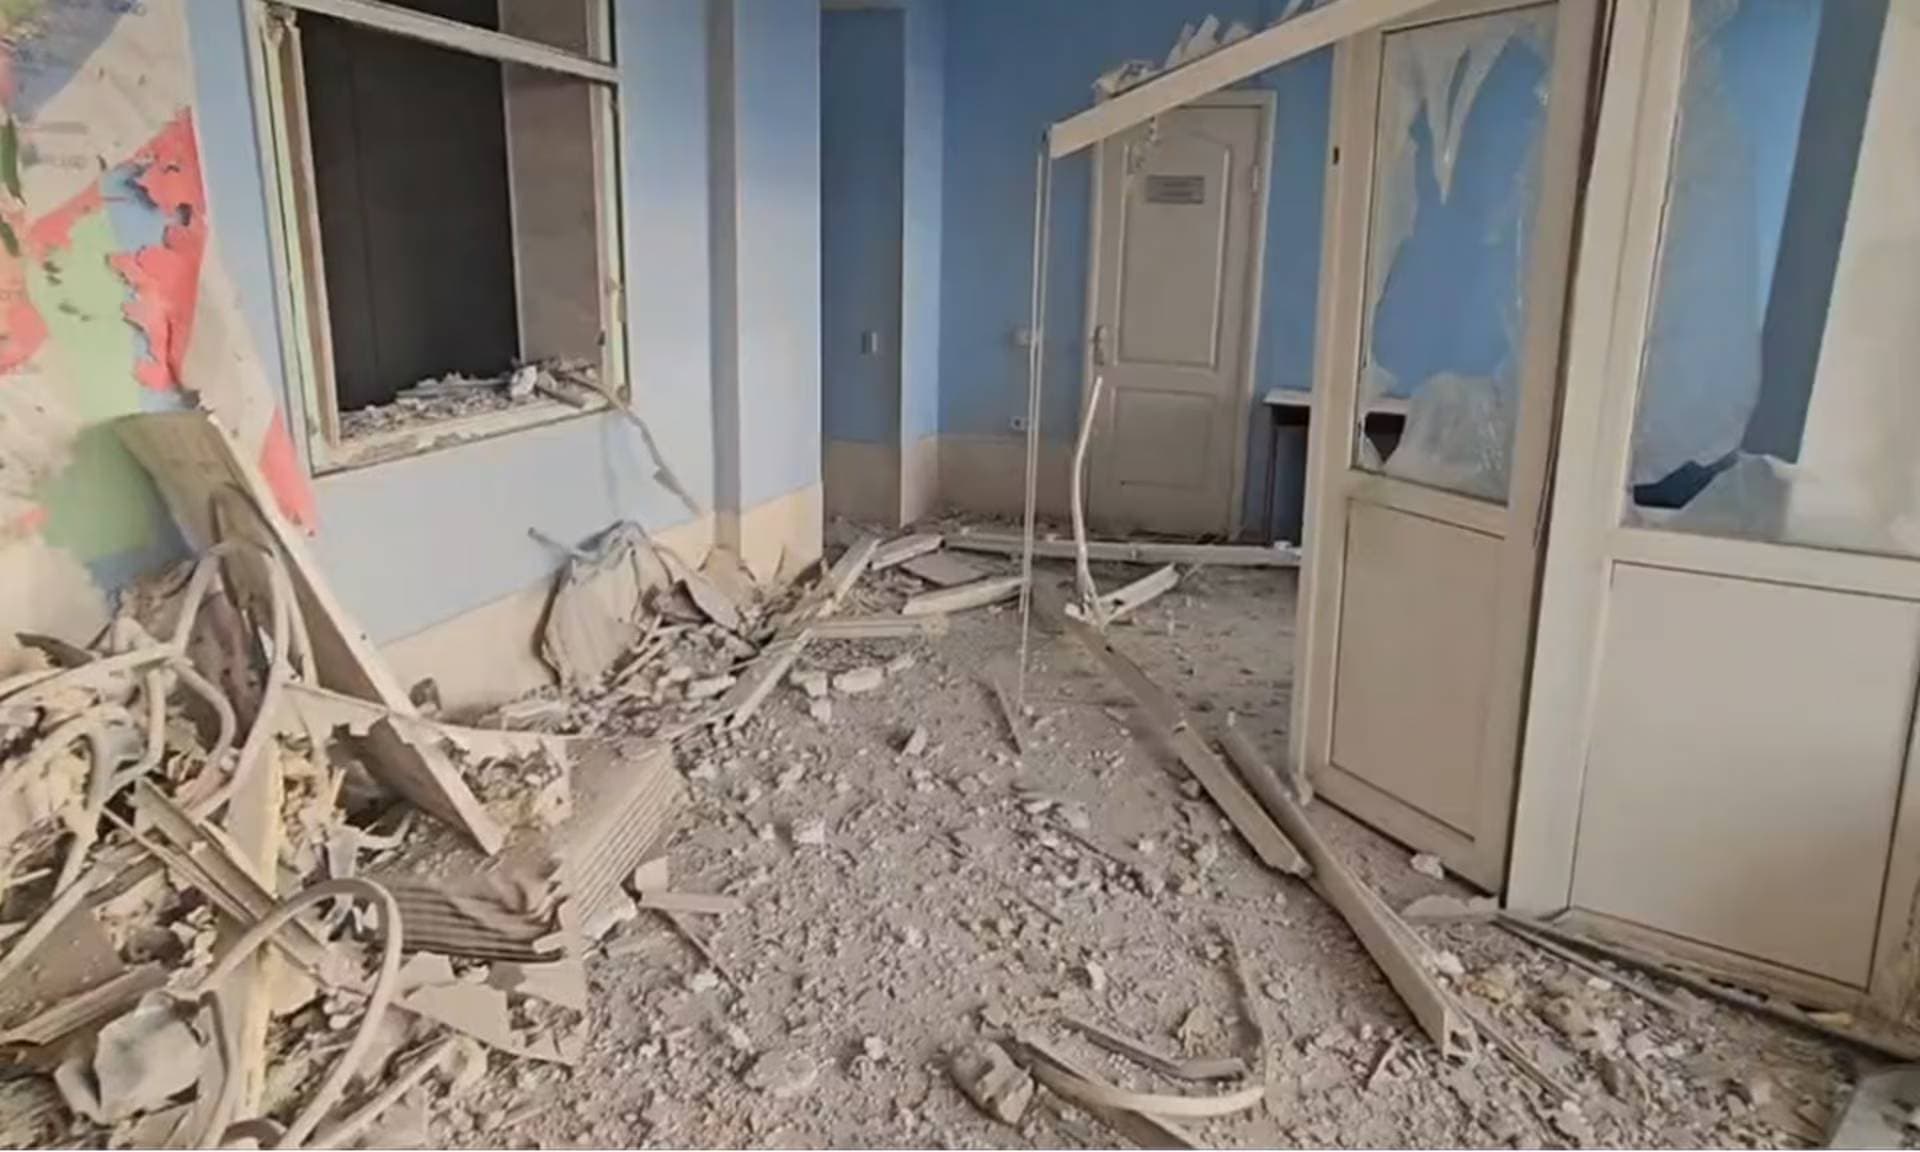 The Dnipro Seagull library’s local history learning room was destroyed in the attack by Russian artillery